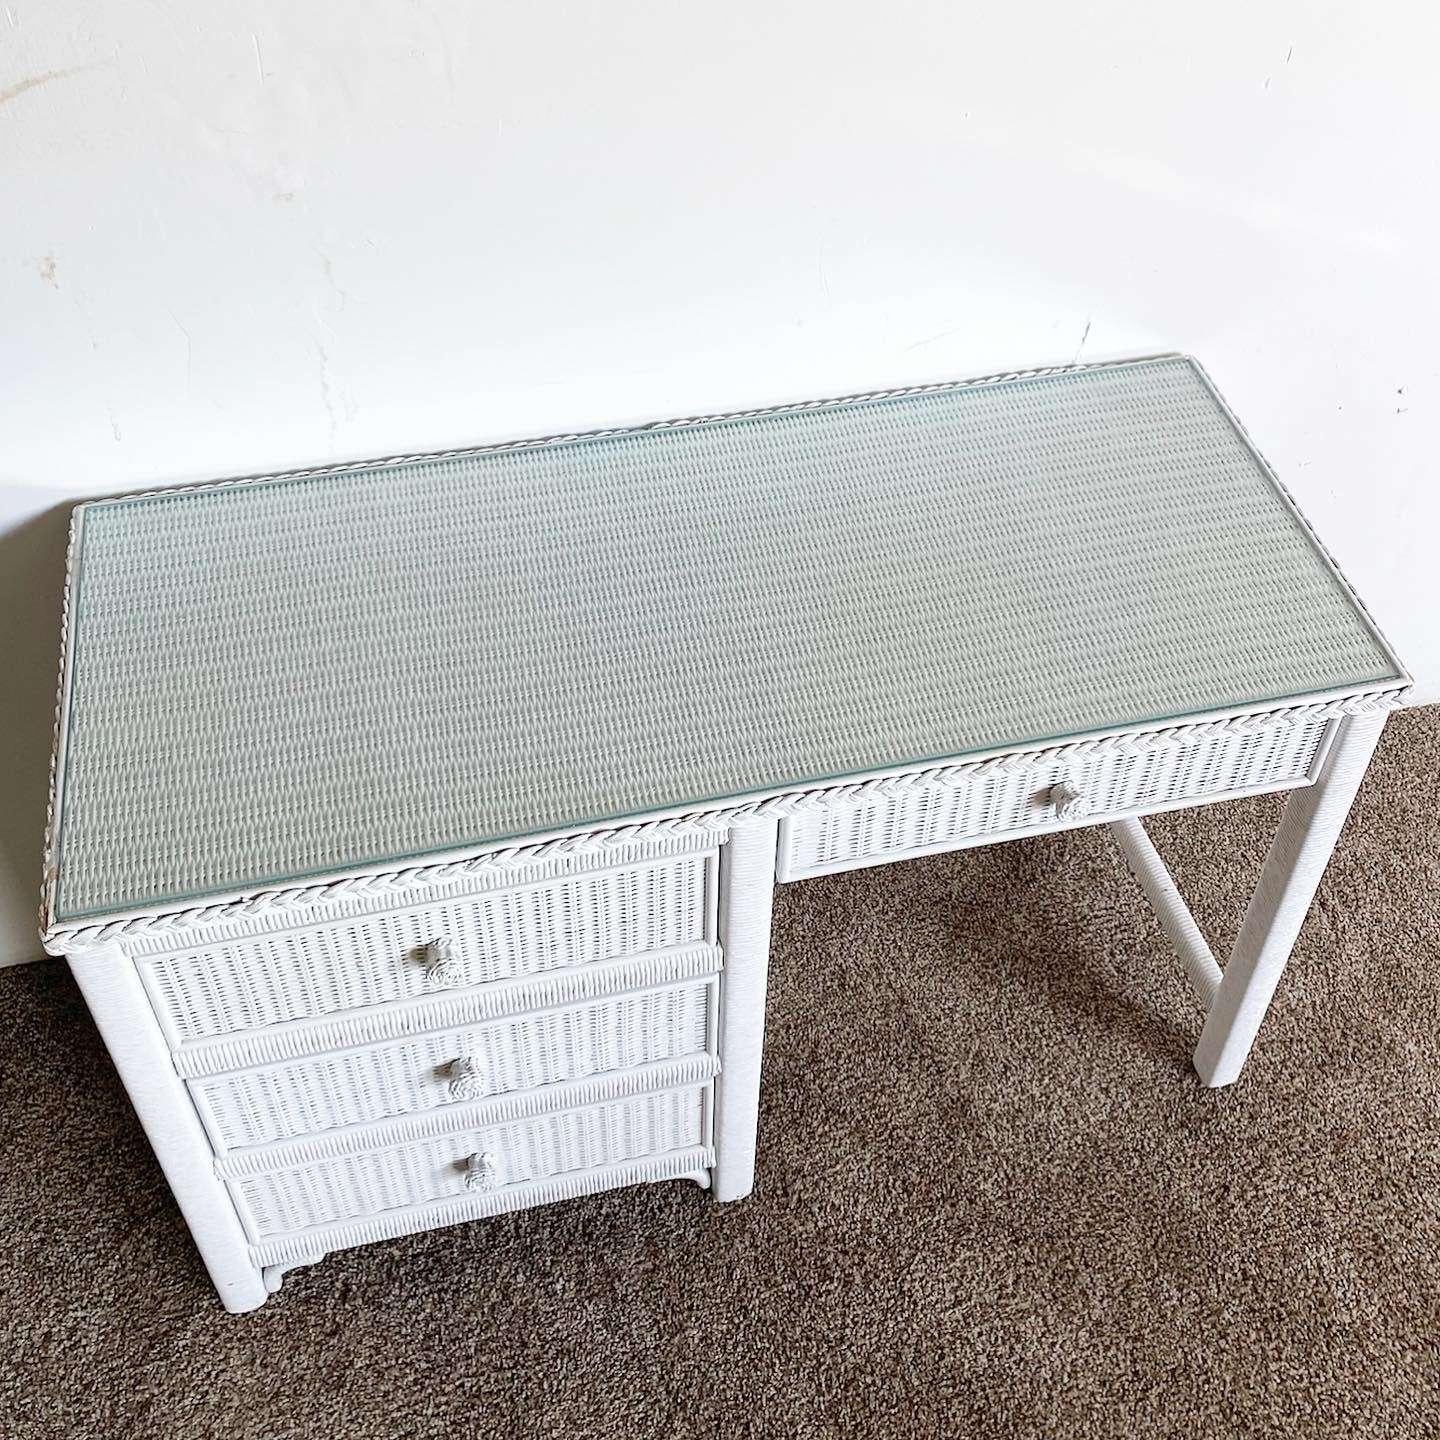 Exceptional vintage, bohemian wicker, and rattan writing desk by Henry Link. Features a painted white finish with a rectangular inlaid glass top.